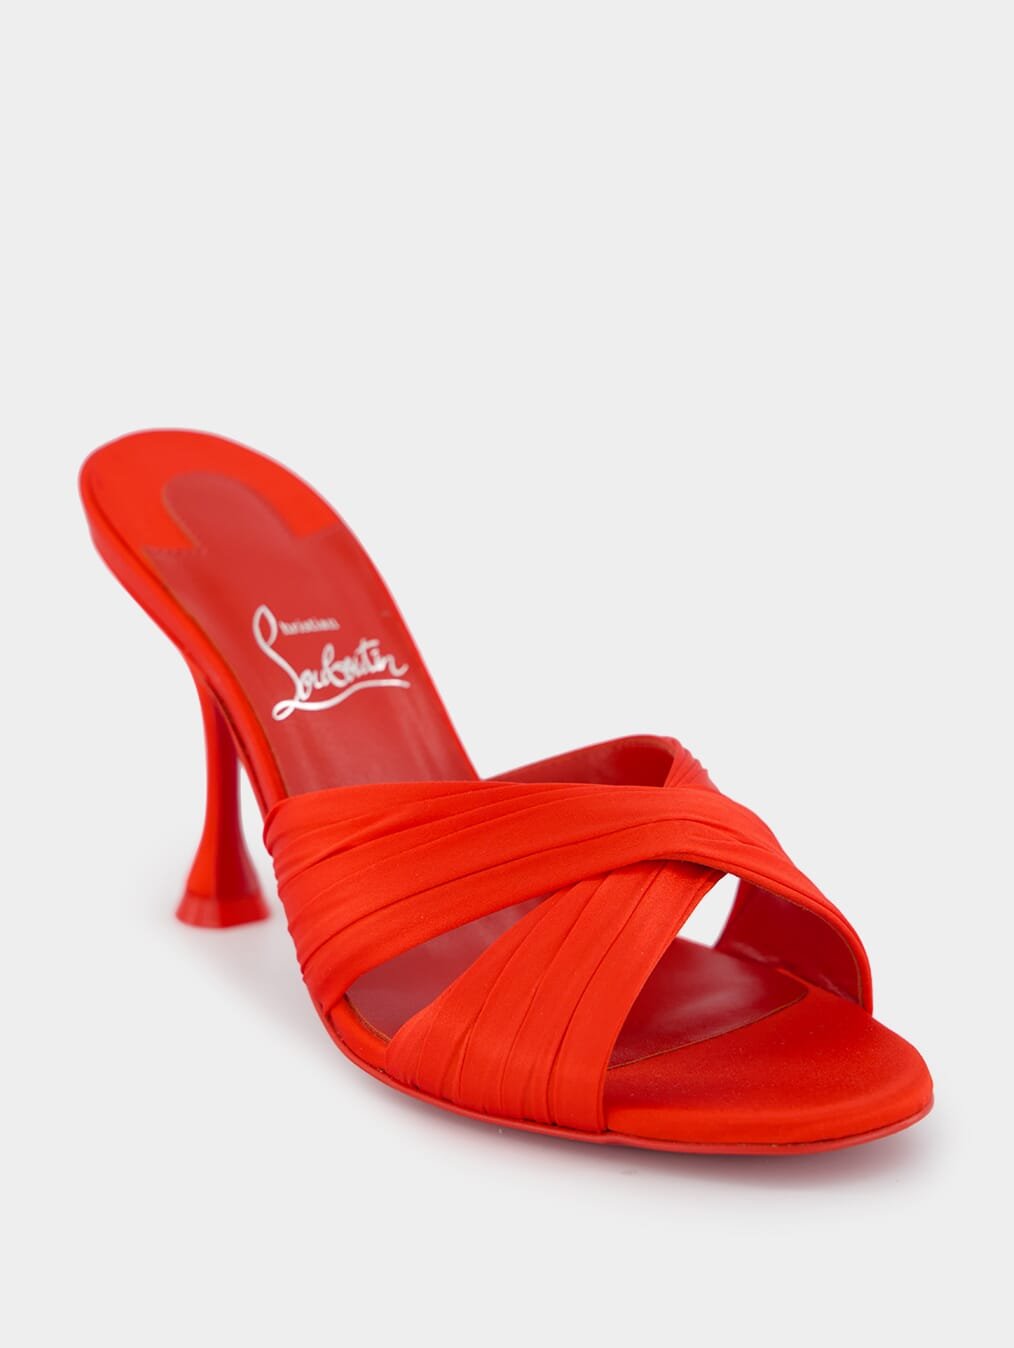 Christian LouboutinNicol Is Back 85mm Mules at Fashion Clinic